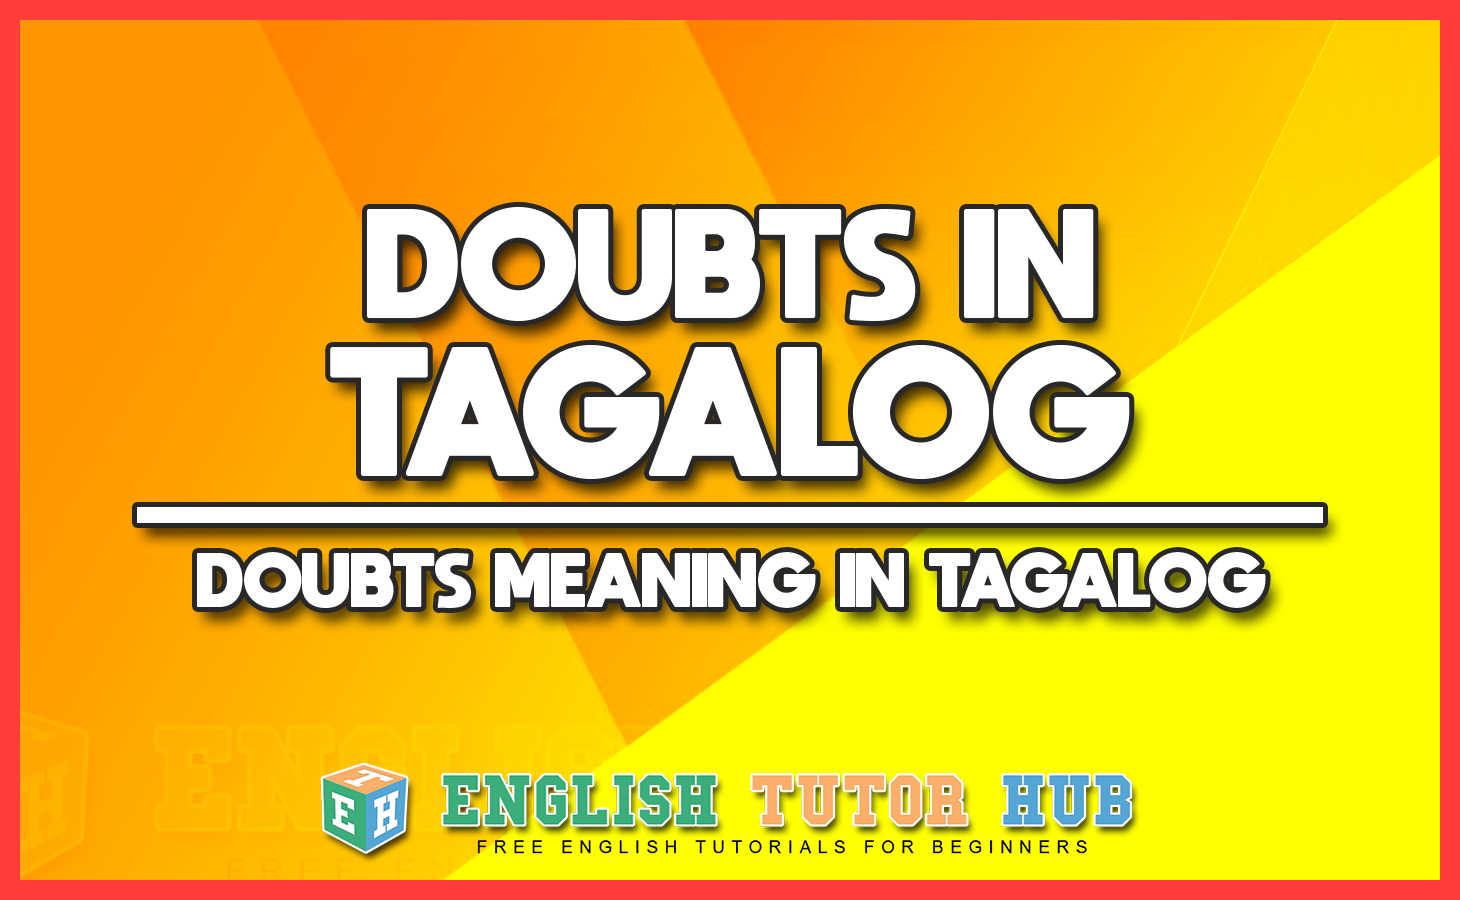 DOUBTS IN TAGALOG - DOUBTS MEANING IN TAGALOG